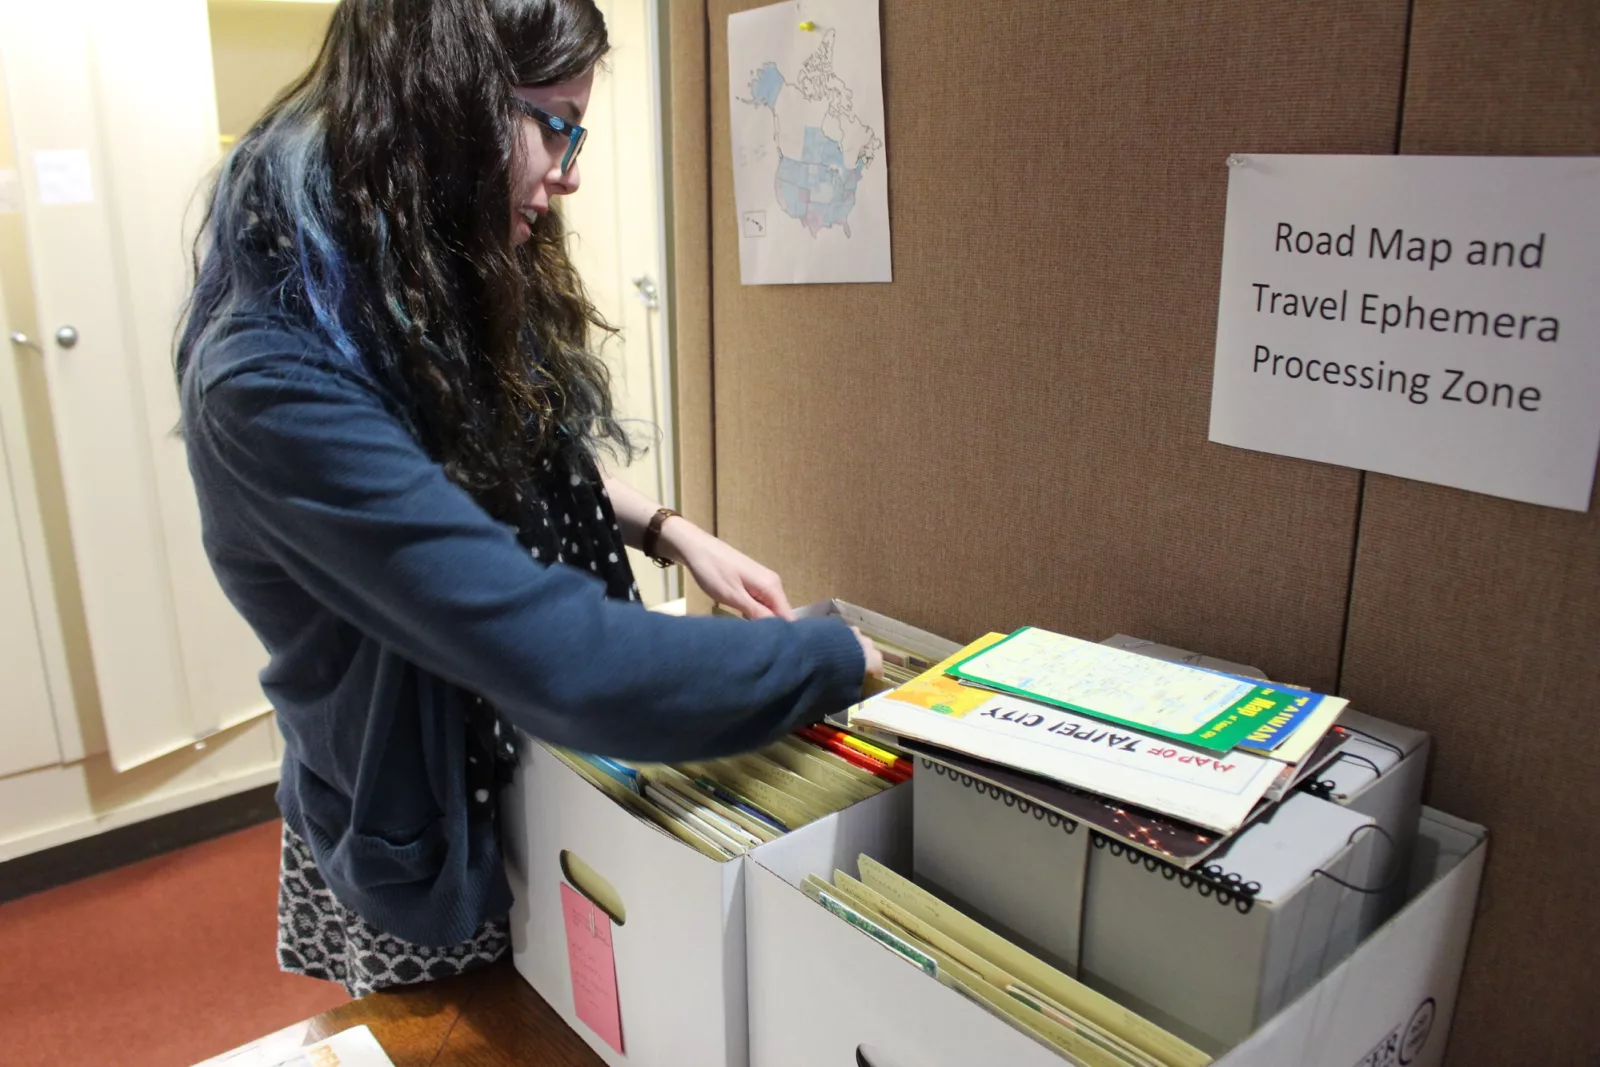 Processing Assistant Emily Richardson at work in the "Road Map and Travel Ephemera Processing Zone"